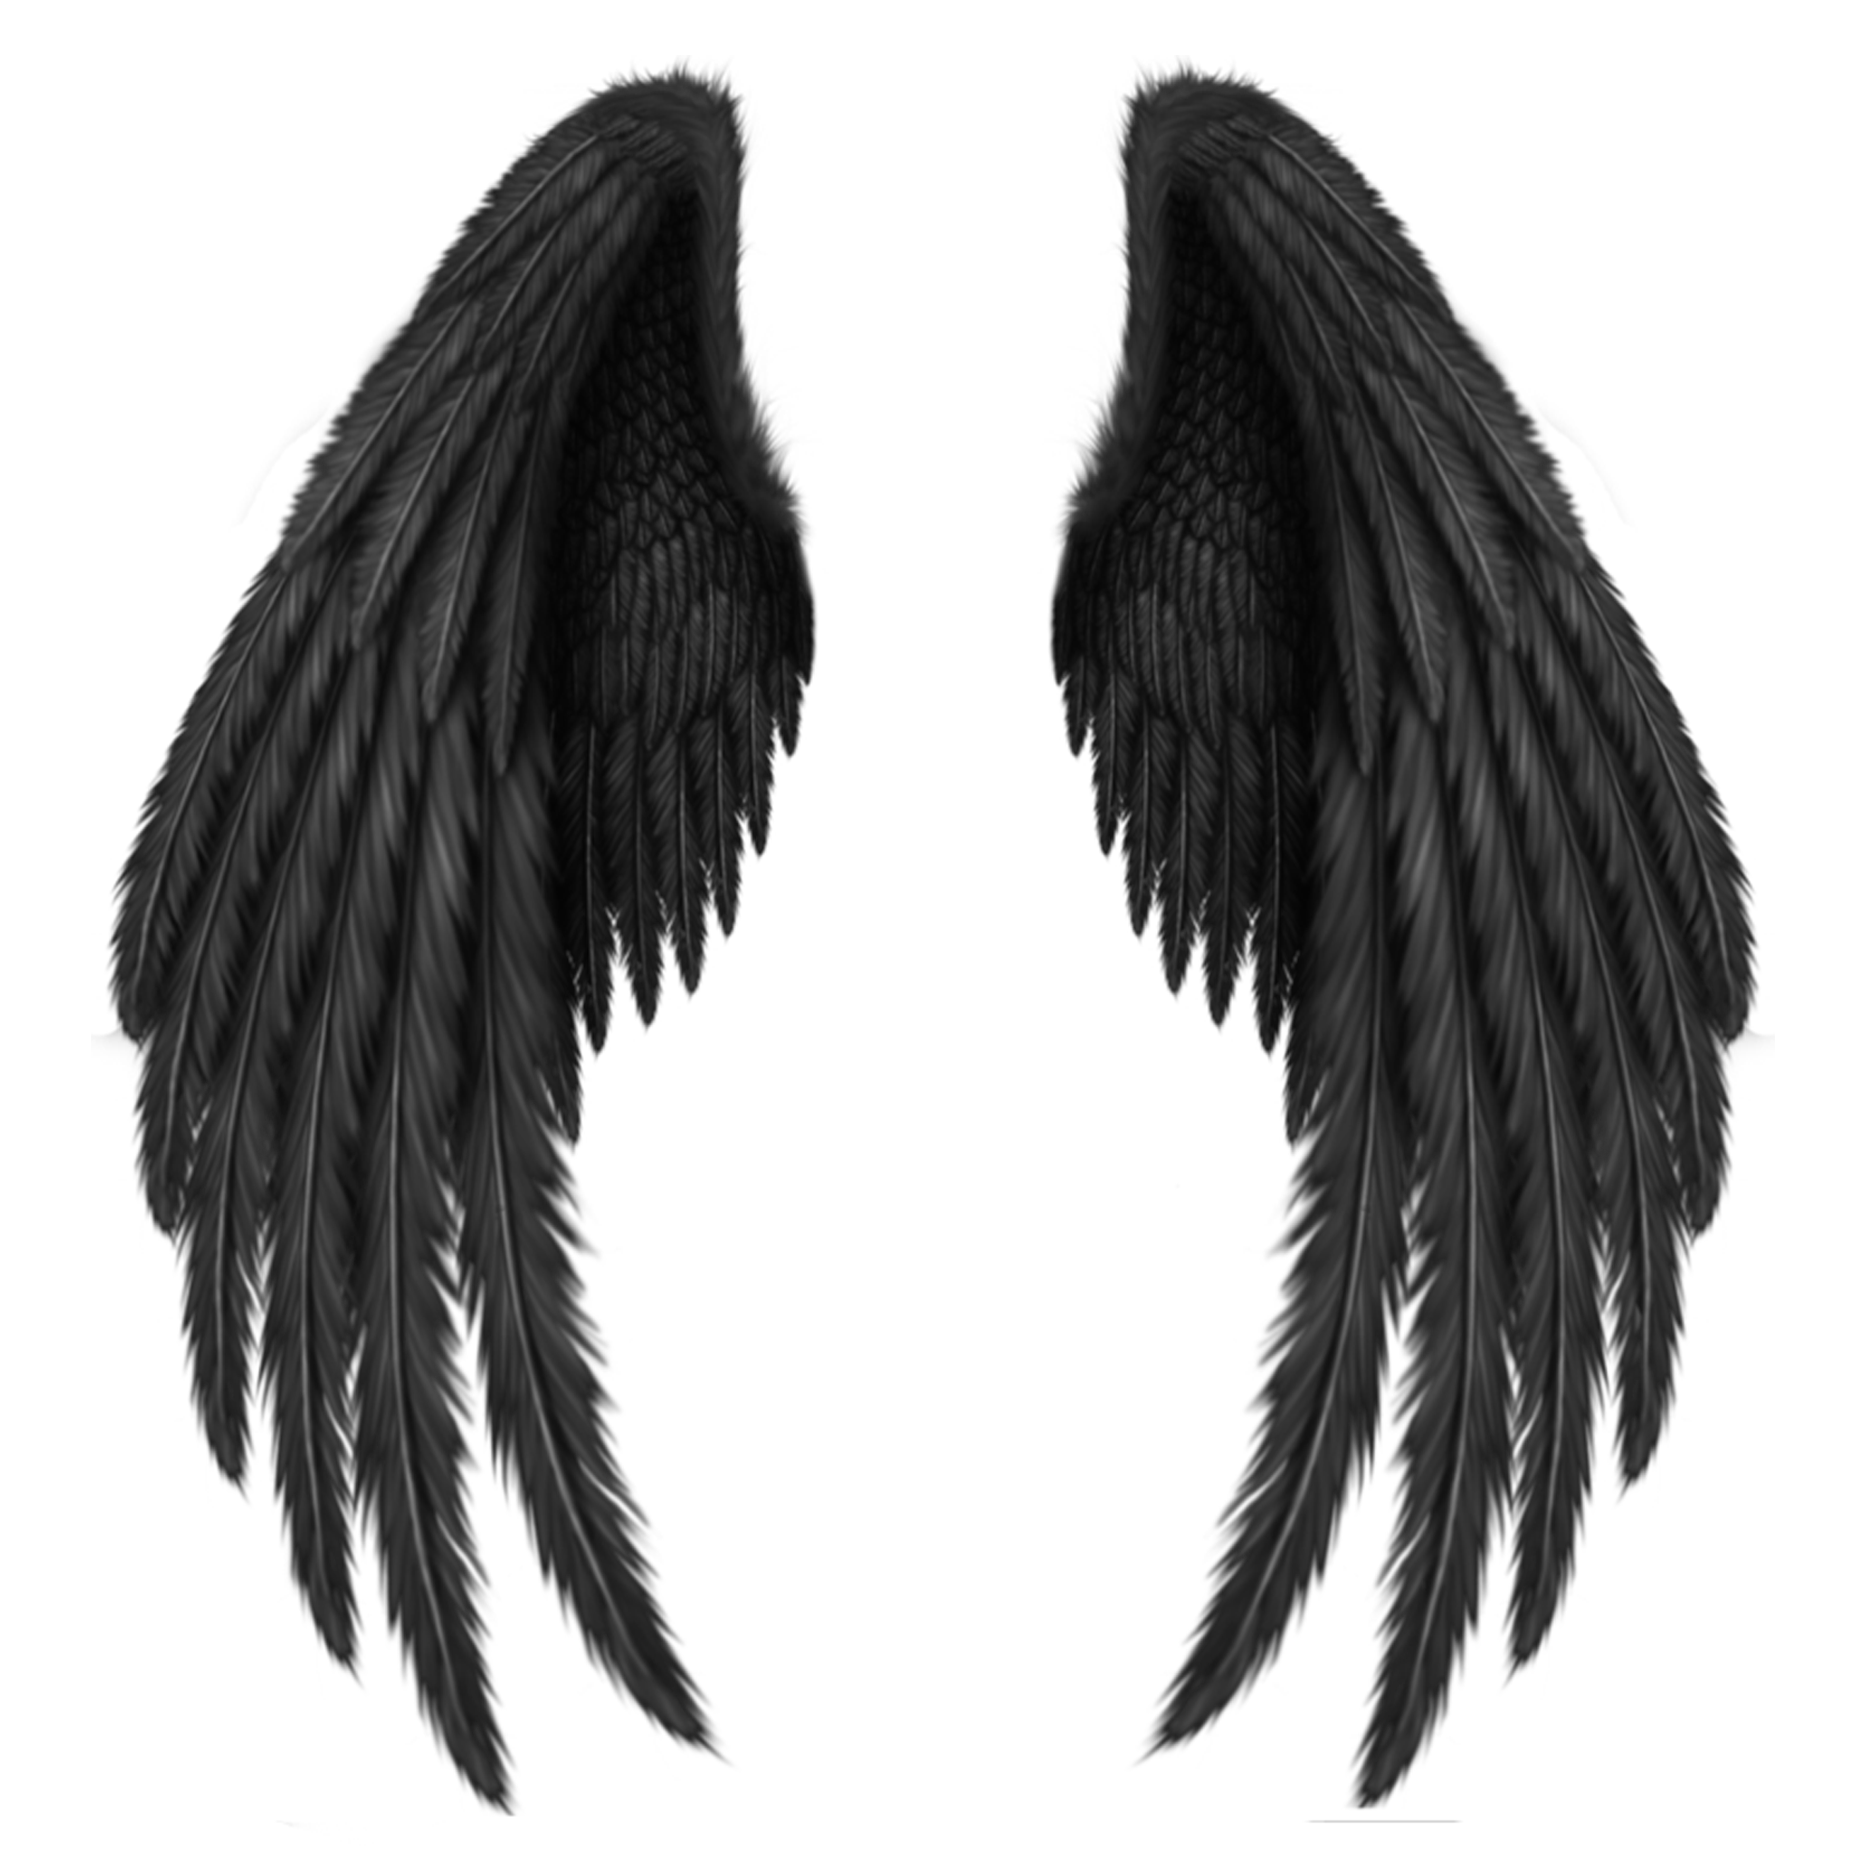 Wing clipart wing hd. Wings png images free